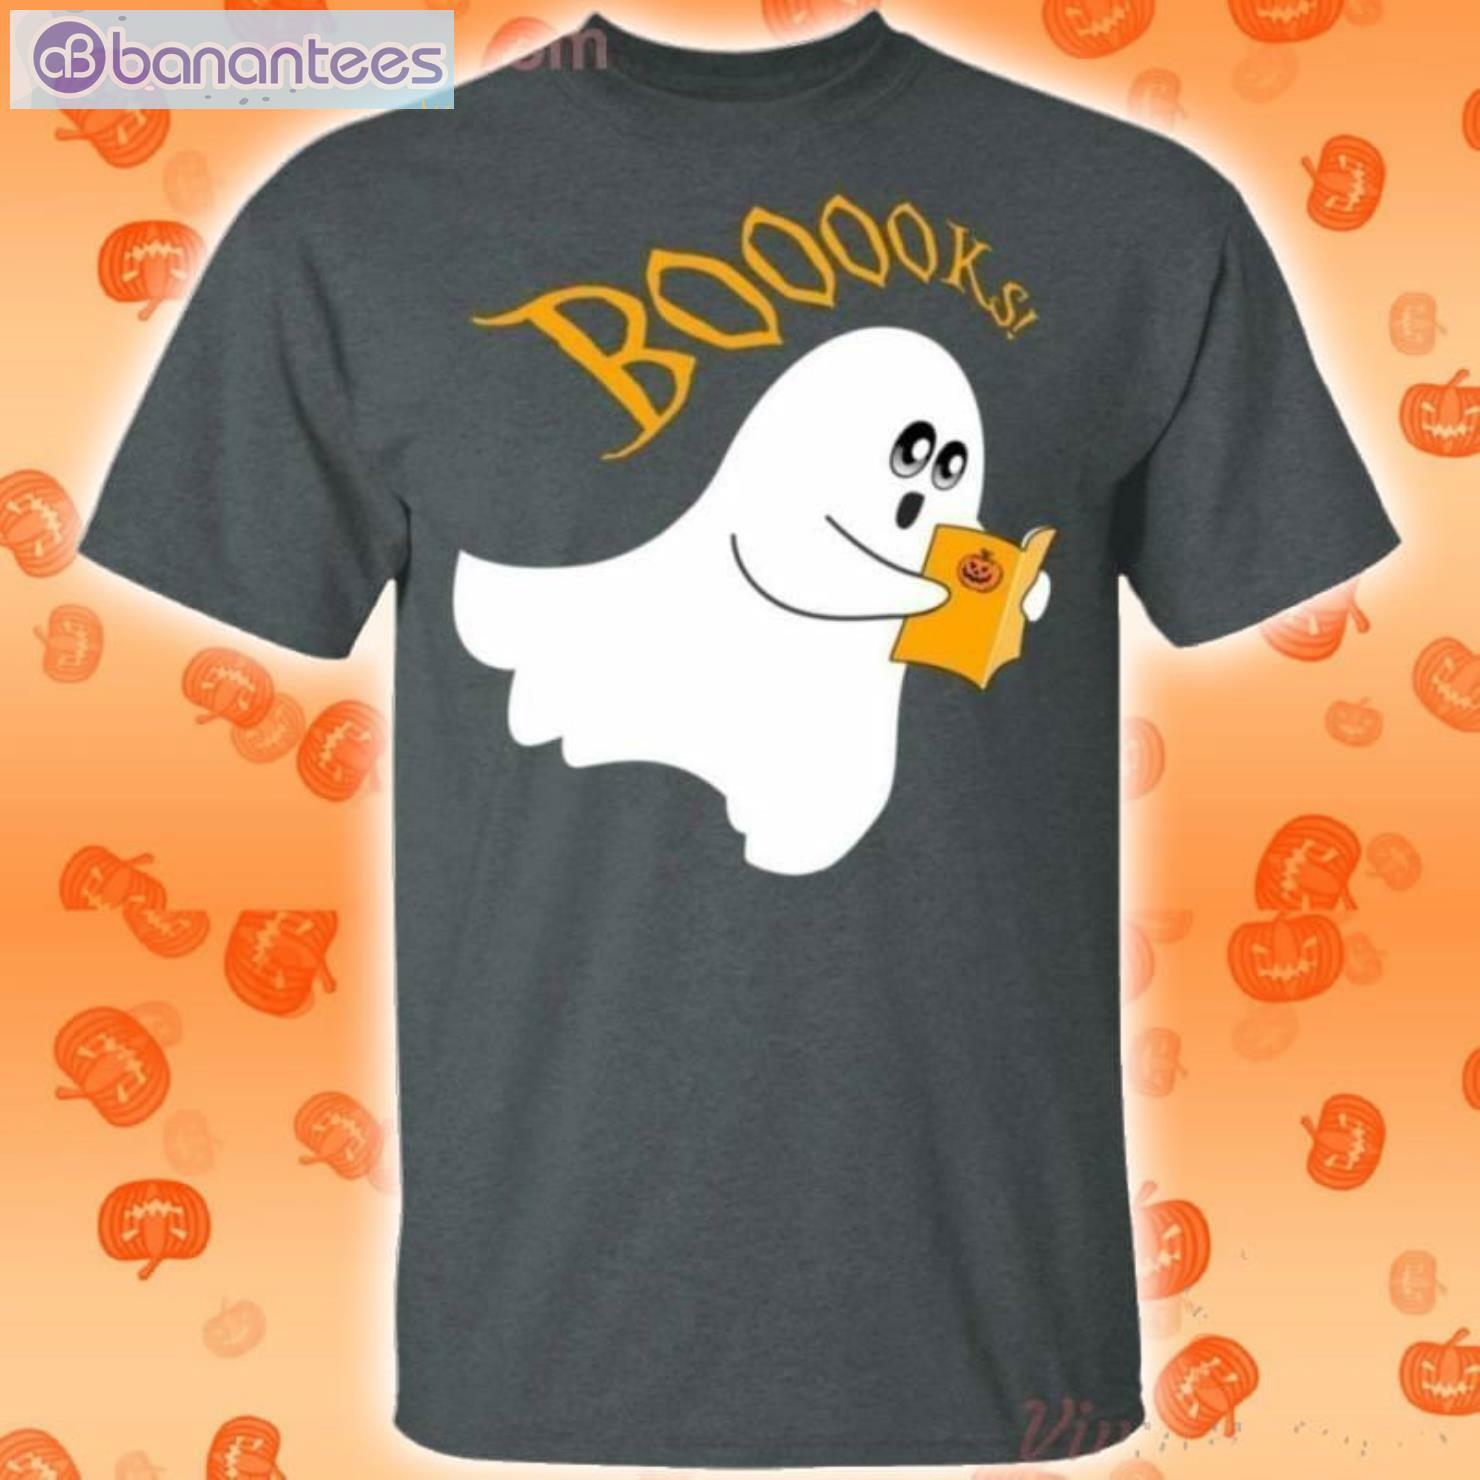 Ghost Reading Books Funny Halloween T-Shirt Product Photo 2 Product photo 2